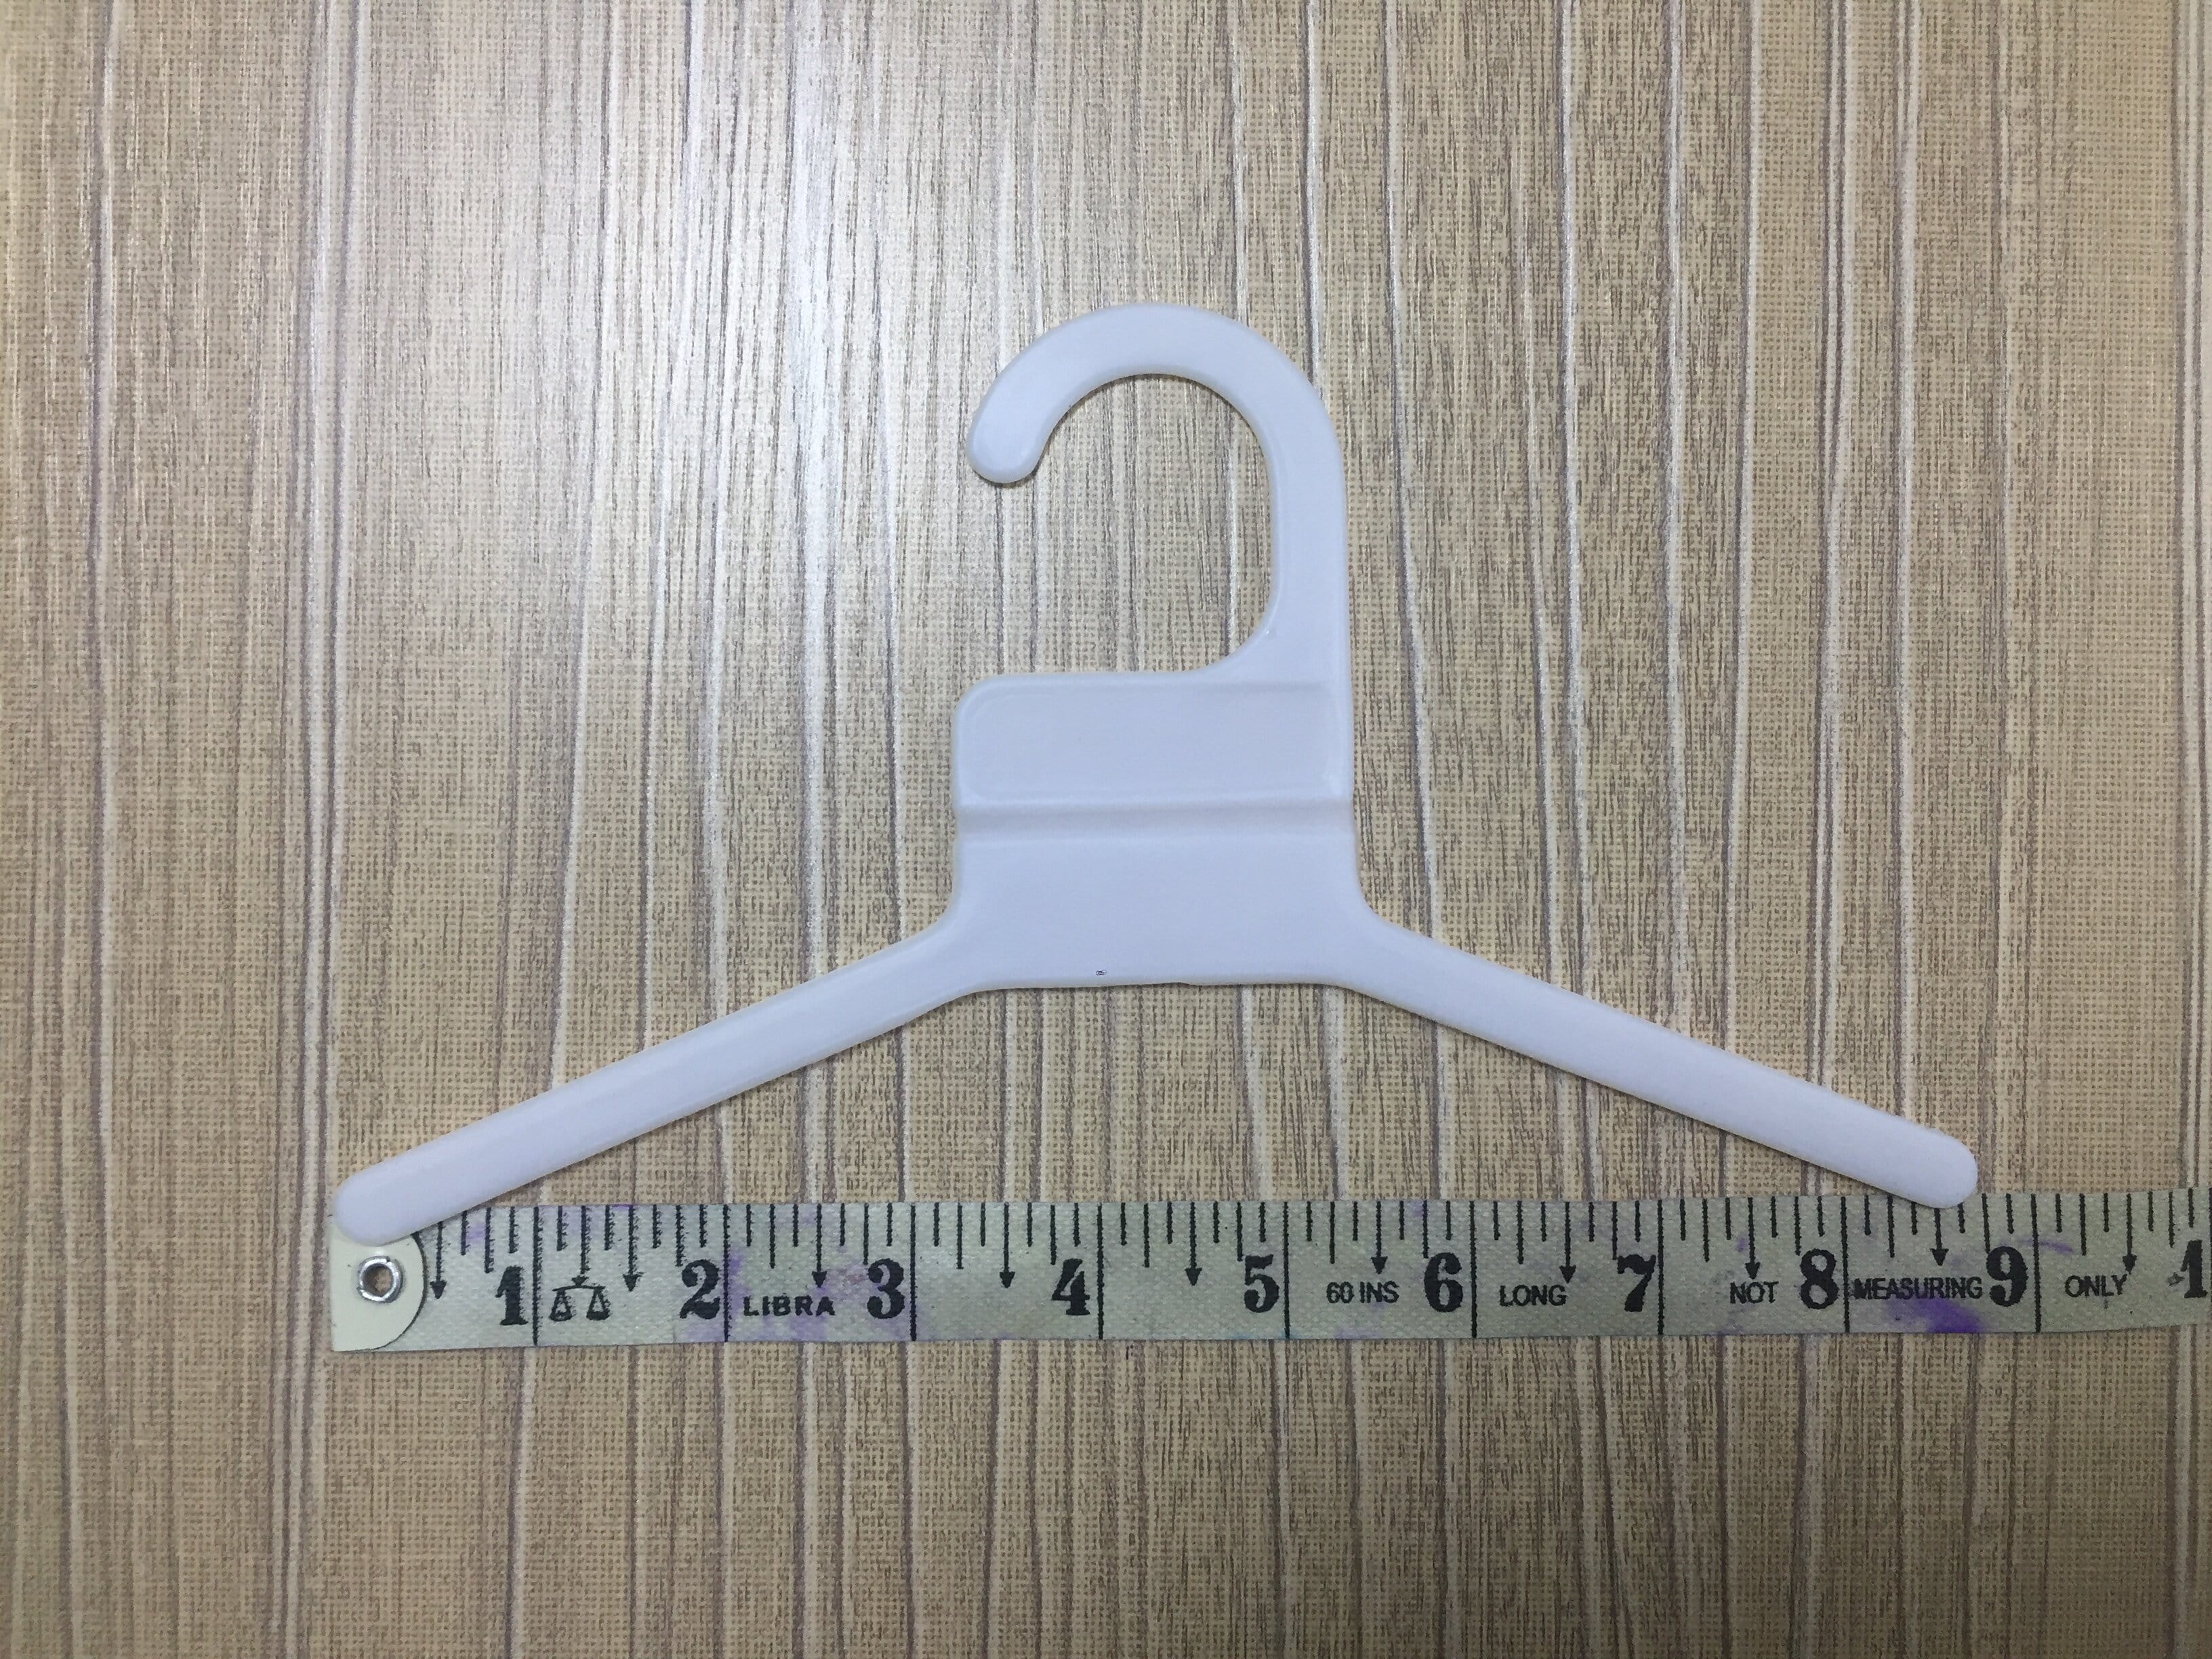 plastic-sleeping-bag-shirt-t-shirt-hangers-manufacturers-and-suppliers-in-india